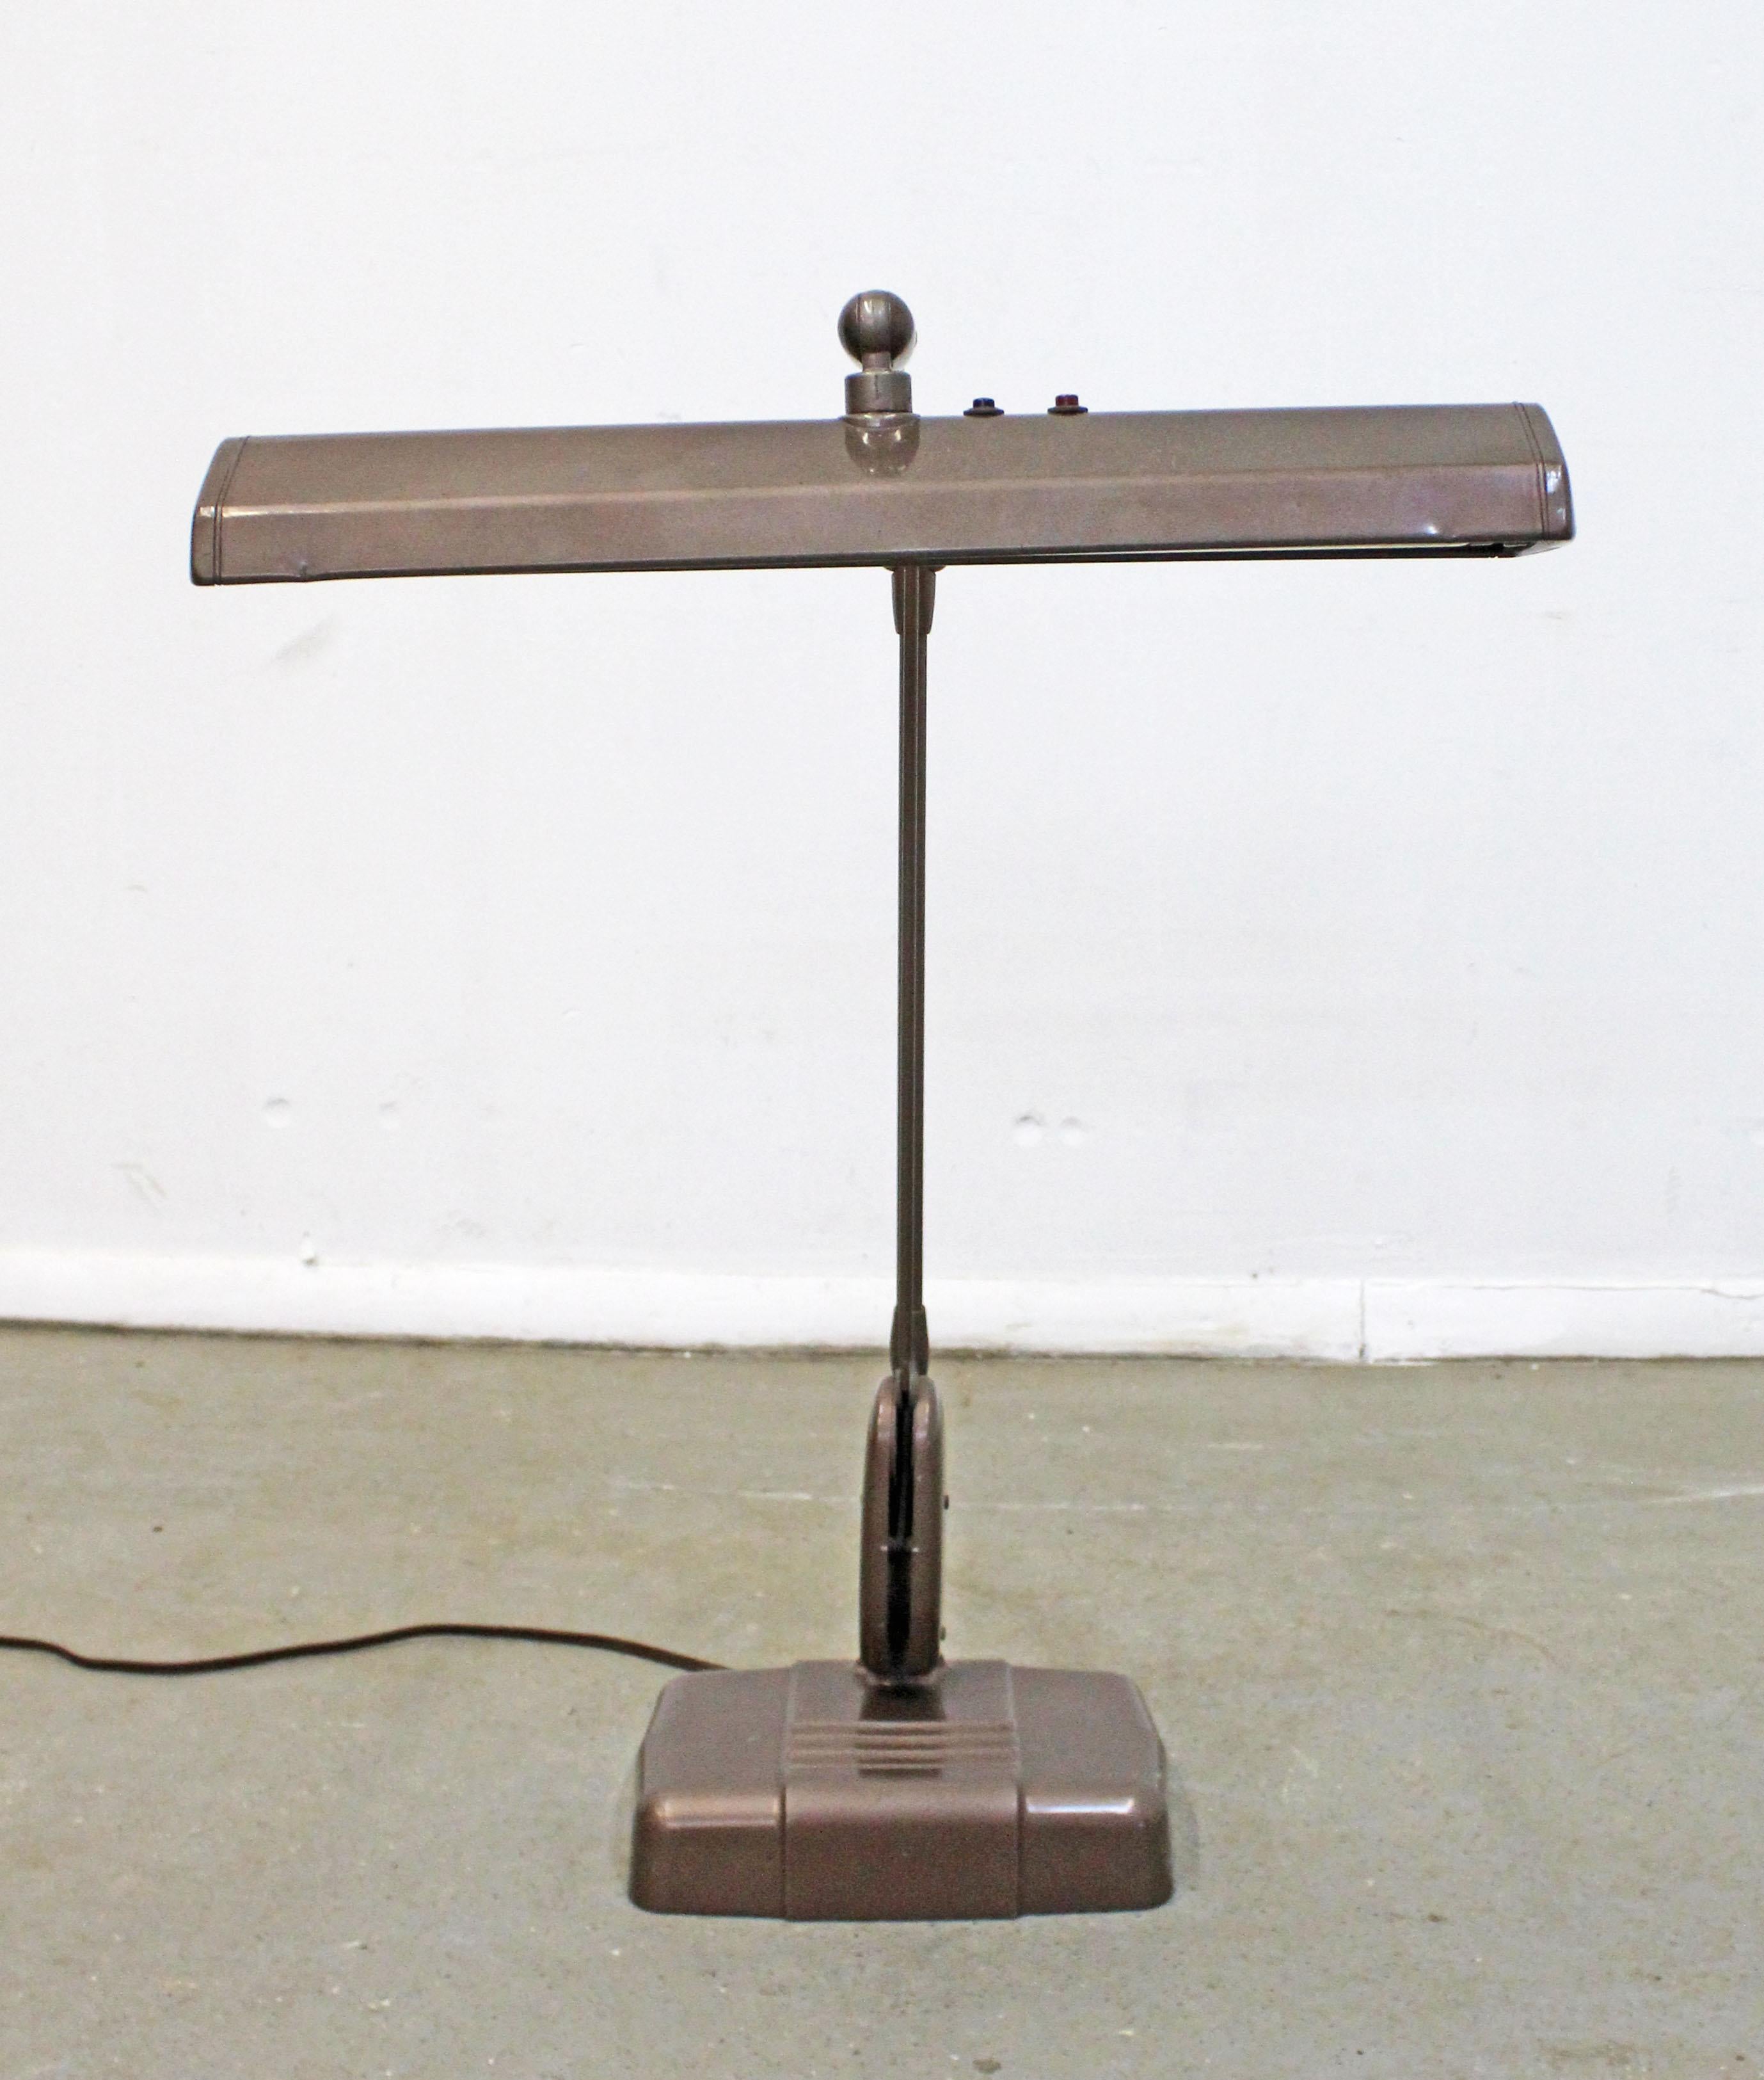 Offered is a vintage midcentury Industrial style table lamp by Dazor Mfg Corp. Perfect for a drafting table or desk. This lamp features a weighted base, adjustable head and an articulating arm that allows it to raise, lower or extend out. In good